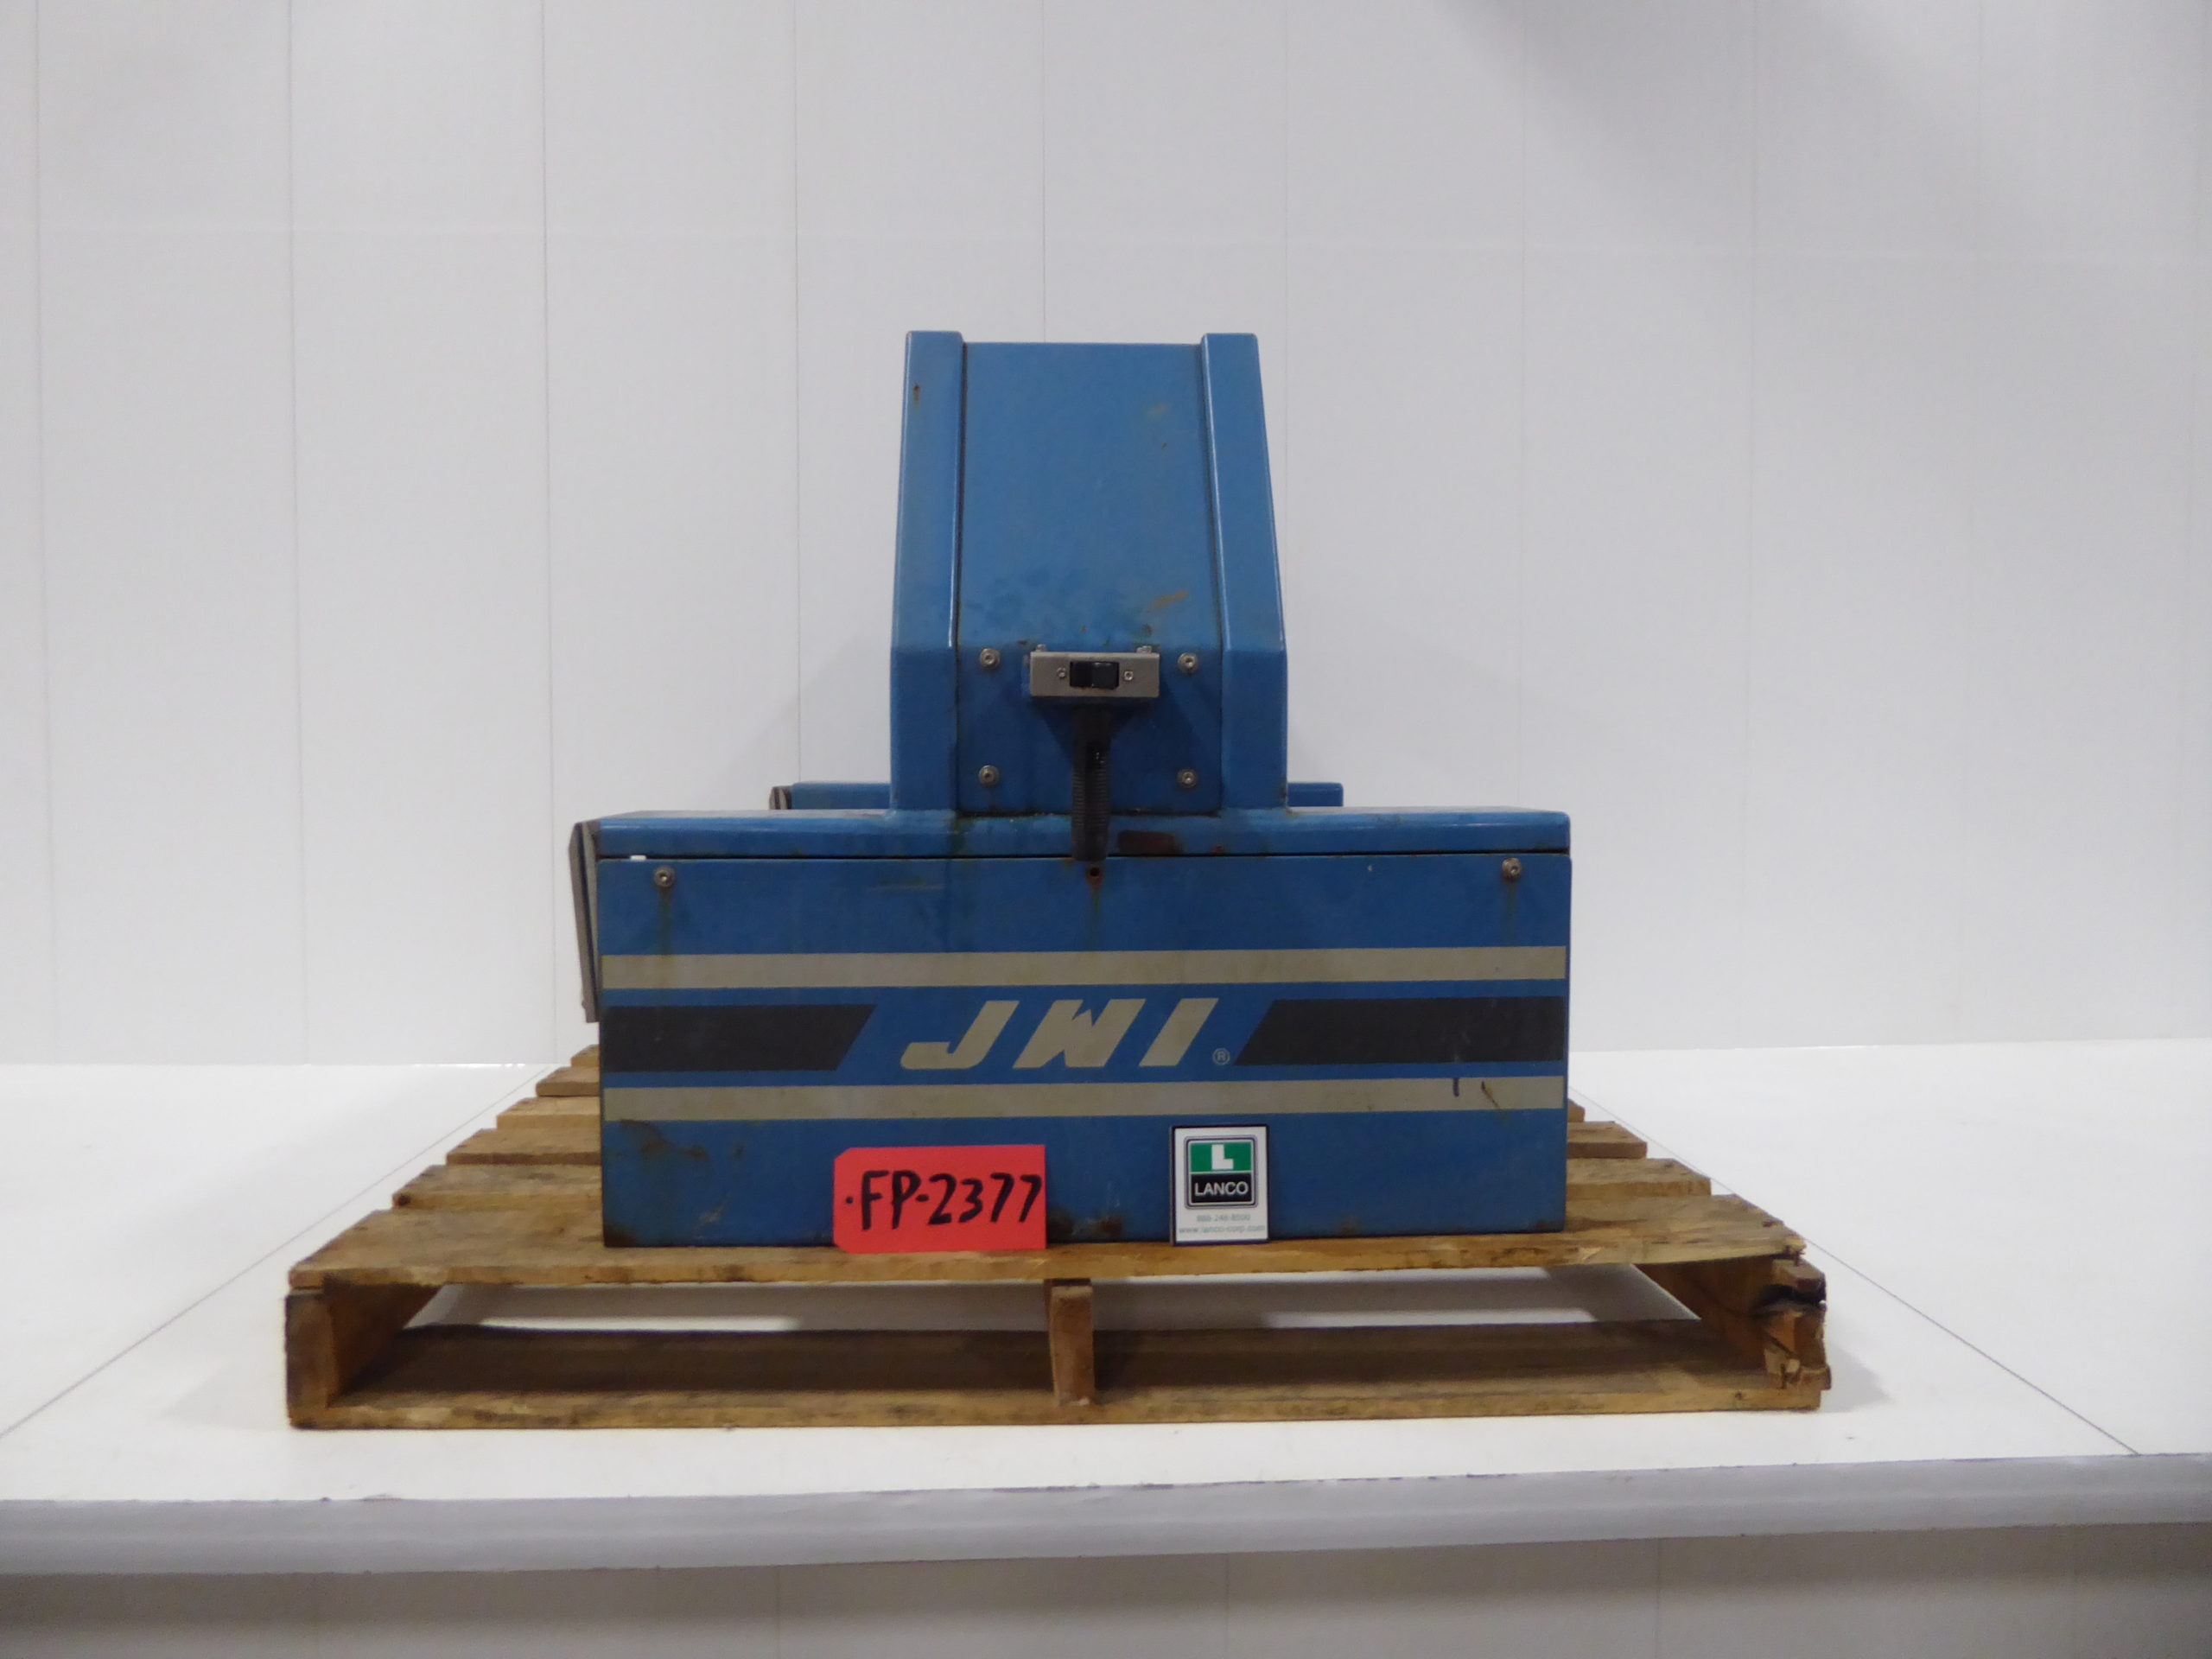 Used Filter Press - JWI Air Operated Plate Shifter for JWI Filter Press FP2377-Filter Presses